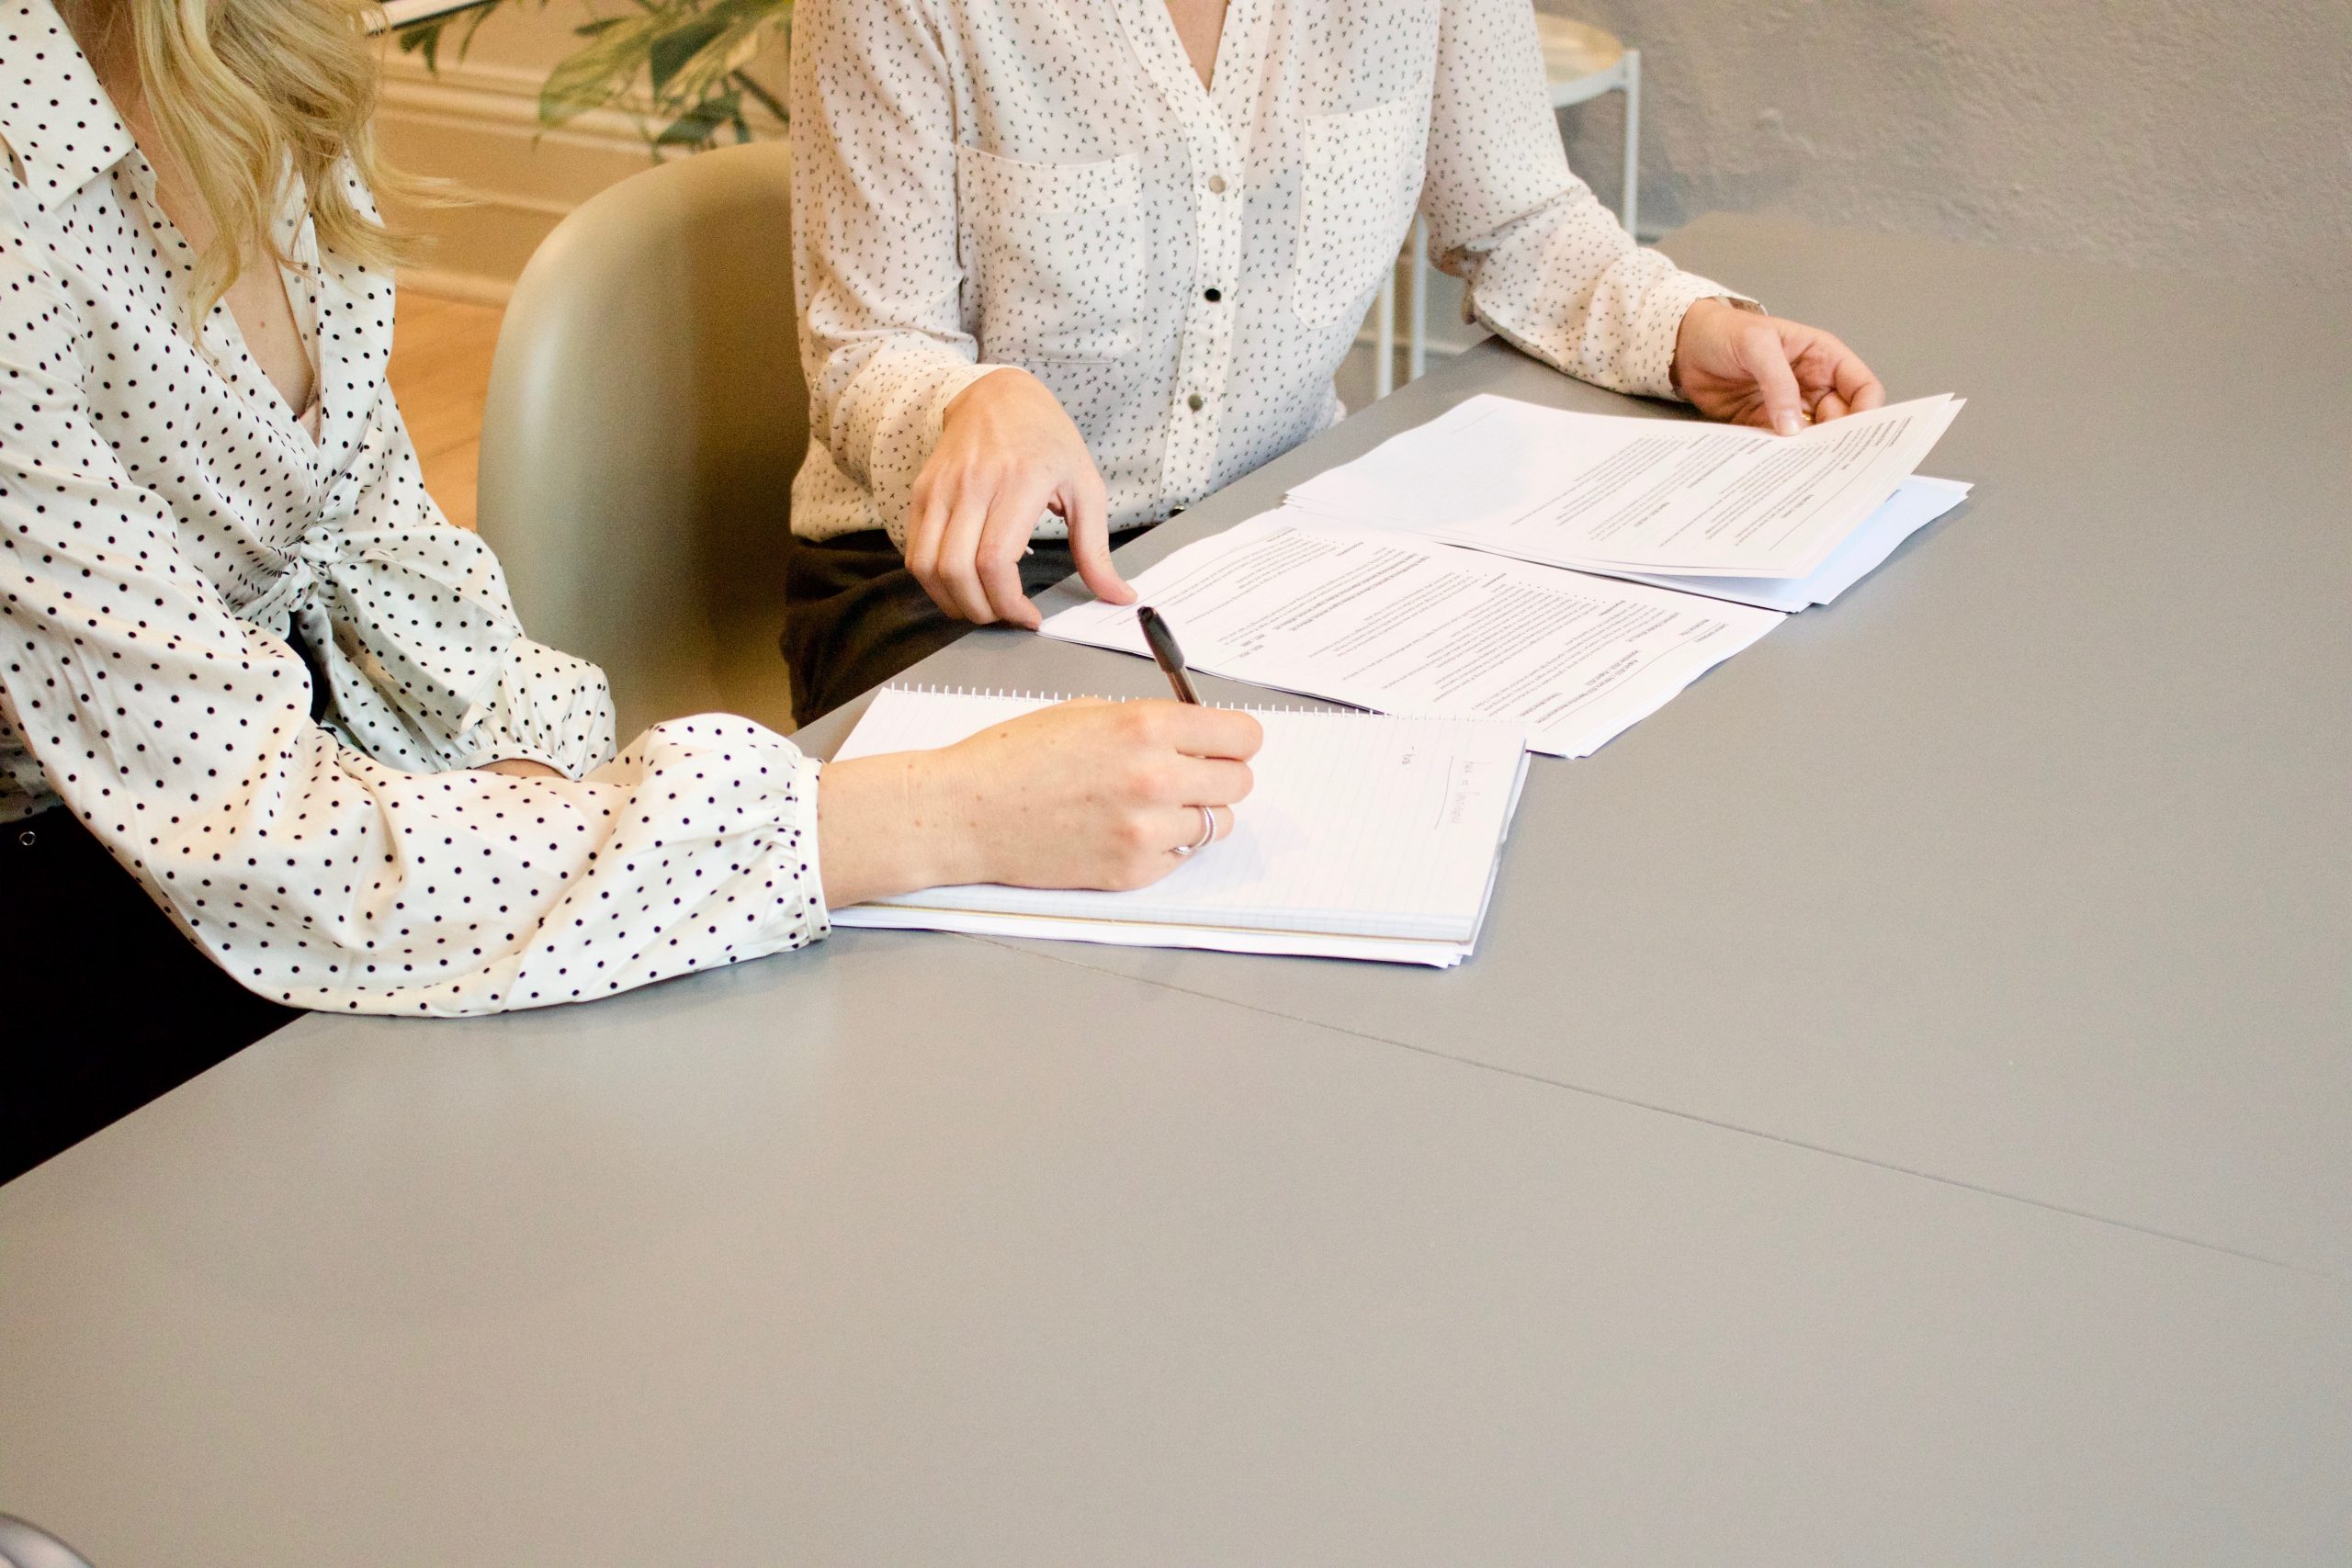 Two women sitting at a desk together, filling out paperwork